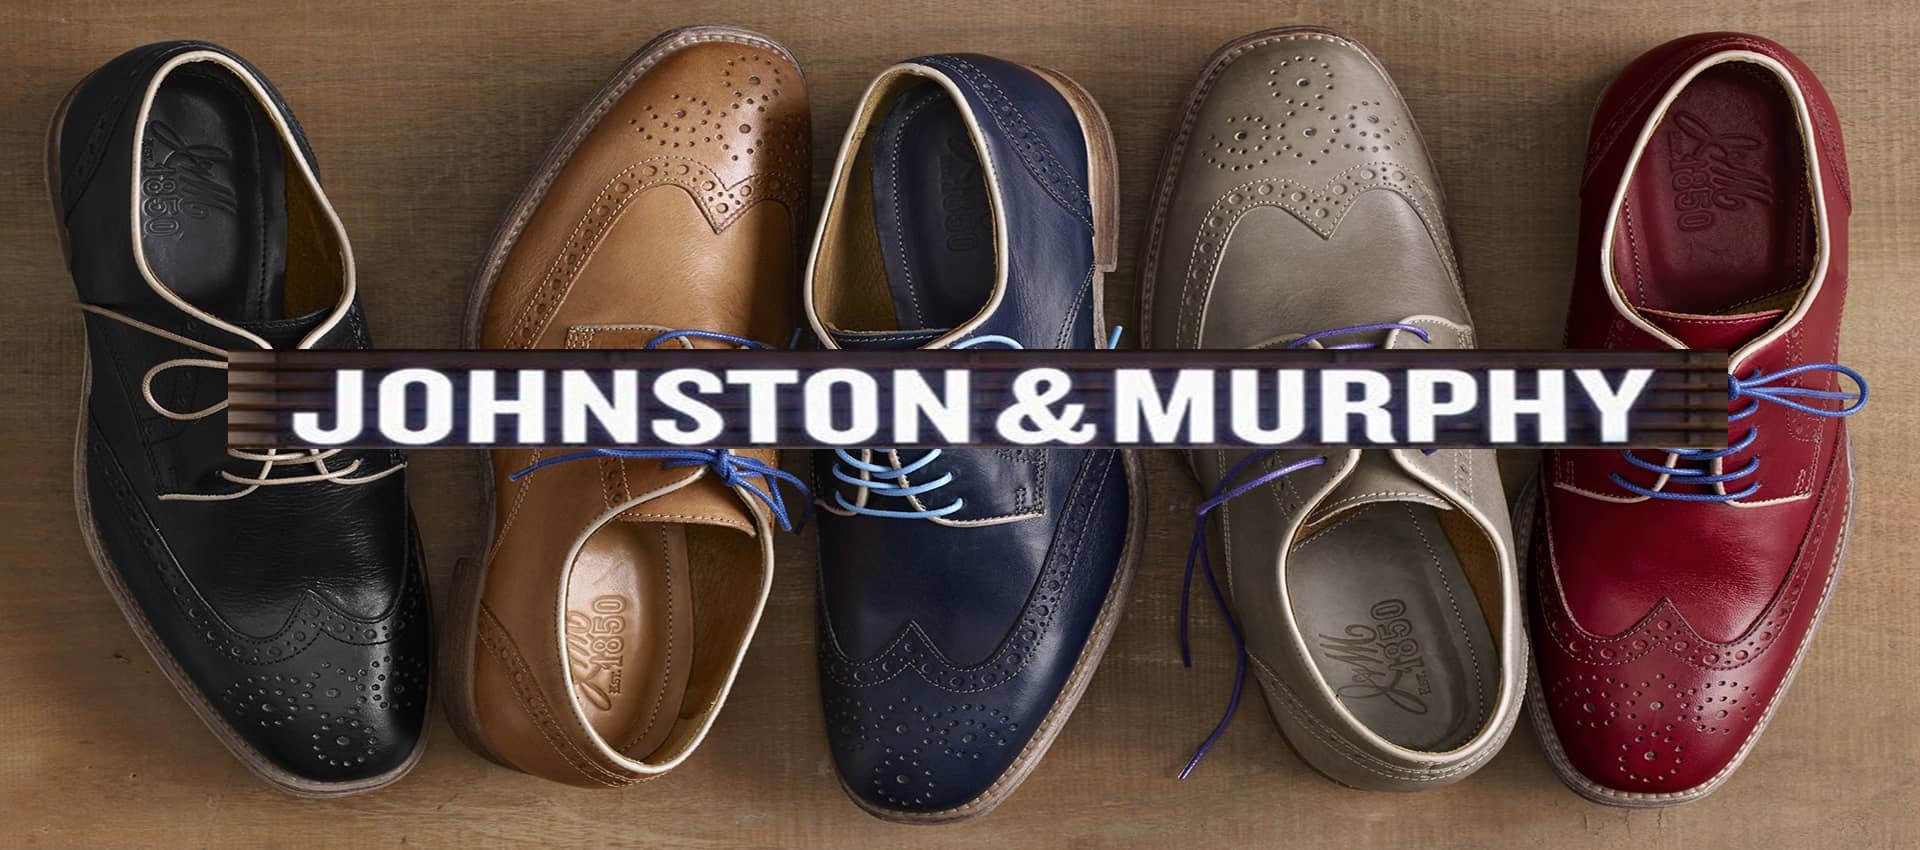 Johnston & Murphy Store Phone Number & Address in Los Angeles ...